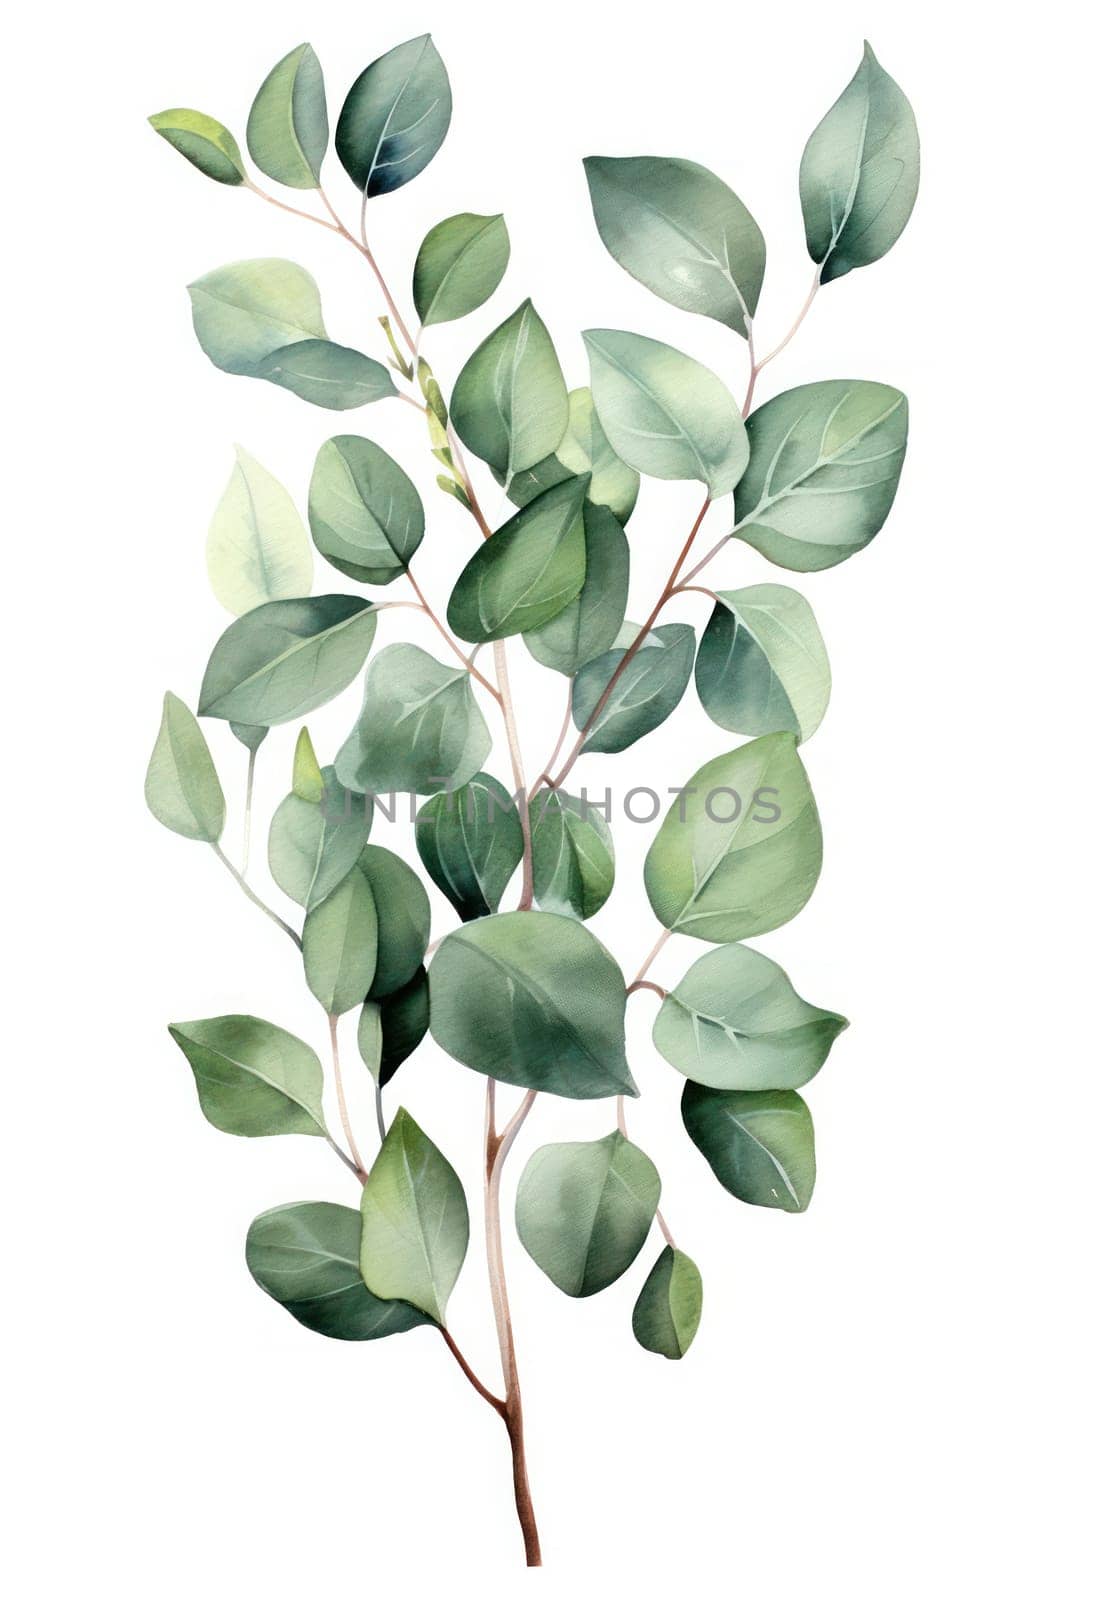 Nature's Delight: A Watercolor Floral Illustration of Exotic Eucalyptus Foliage, Gracefully Flowing on a Botanical Background by Vichizh